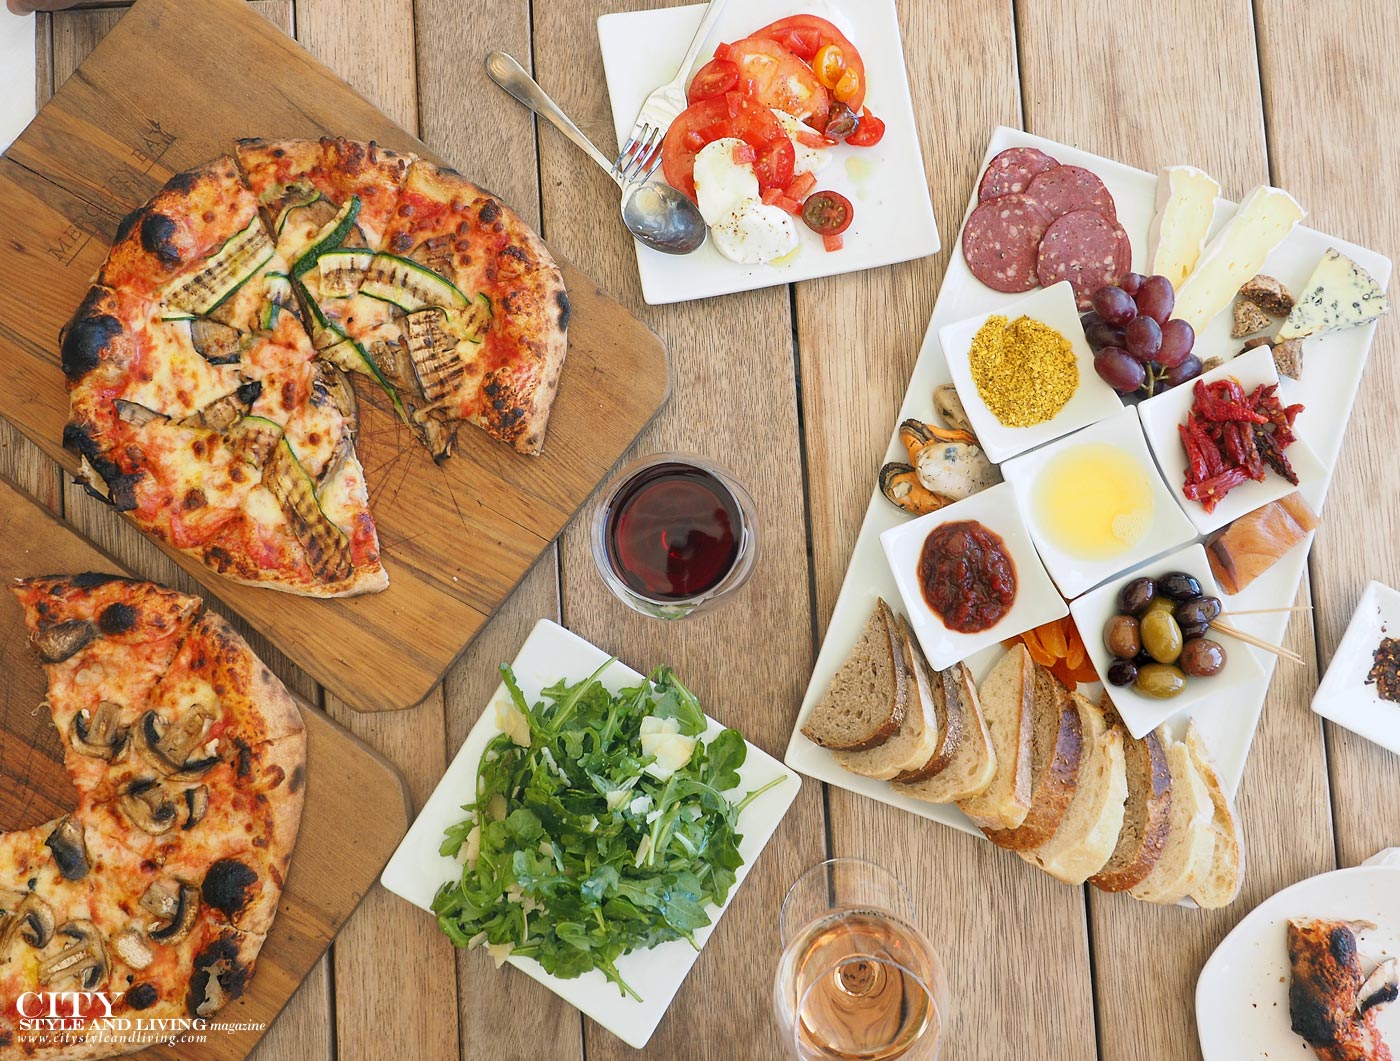 City Style and Living magazine new zealand coromandel mercury bay estate winery Italian lunch charcuterie and pizza